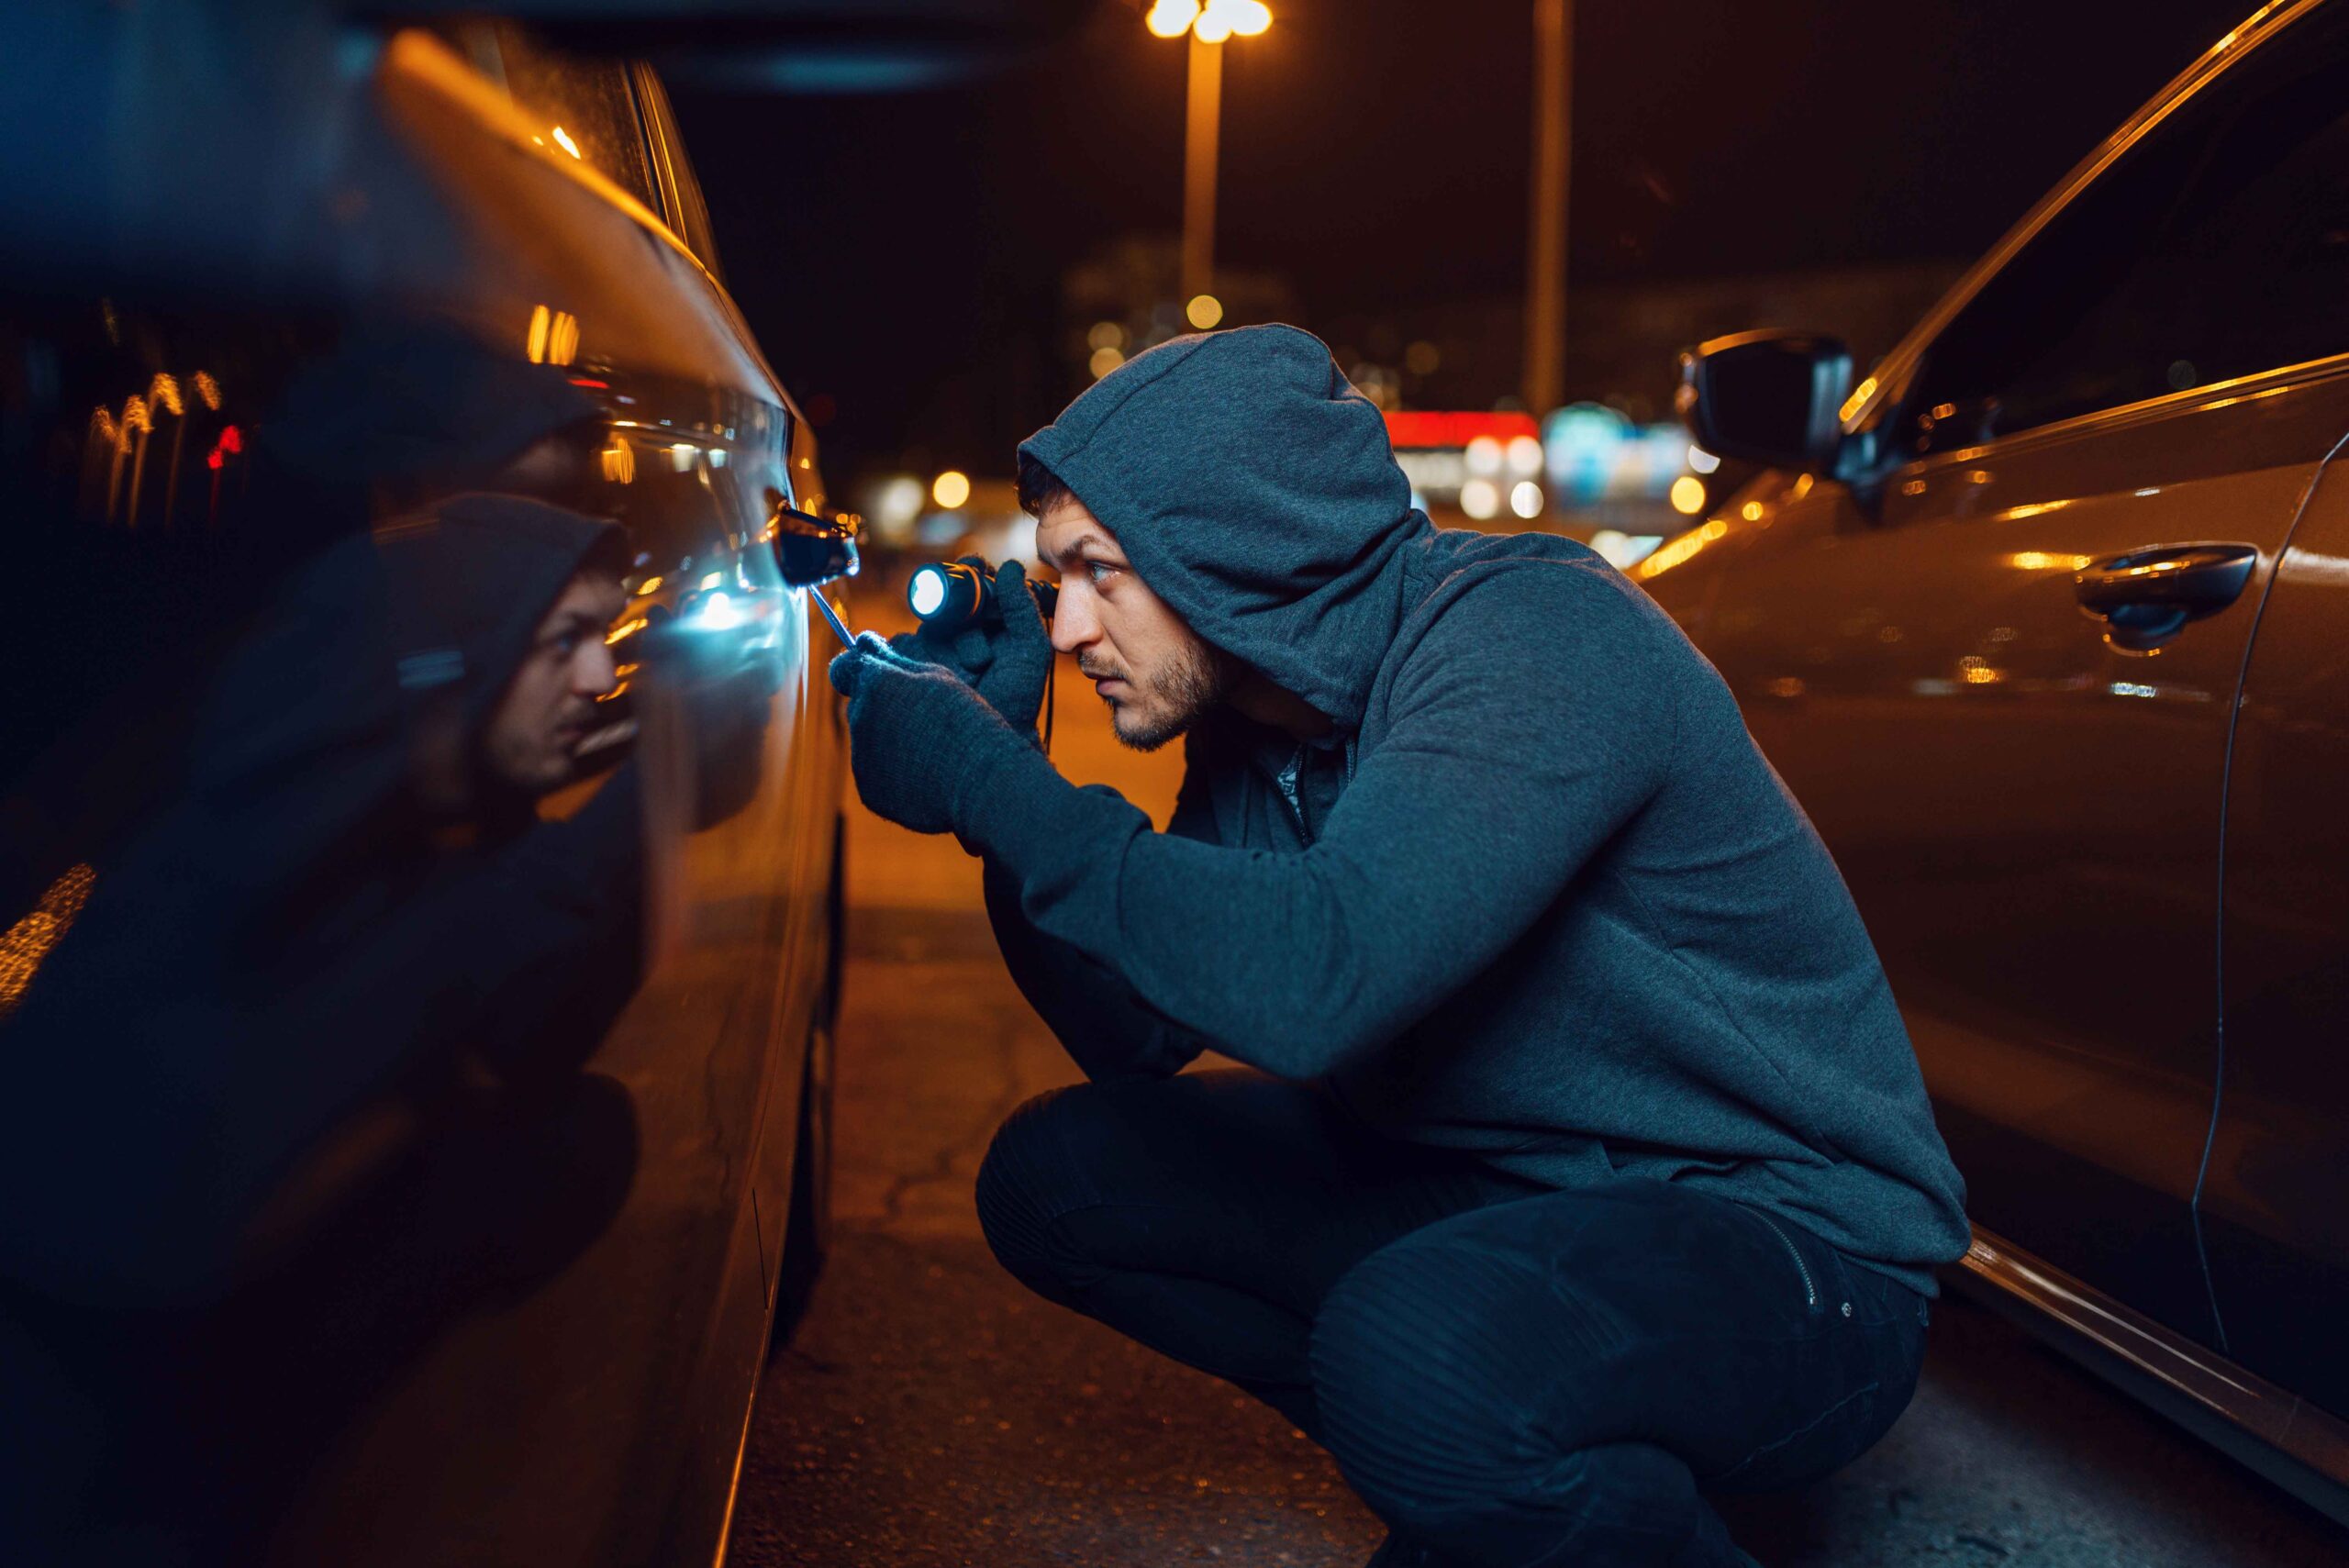 Car theft : How to protect yourself from car theft